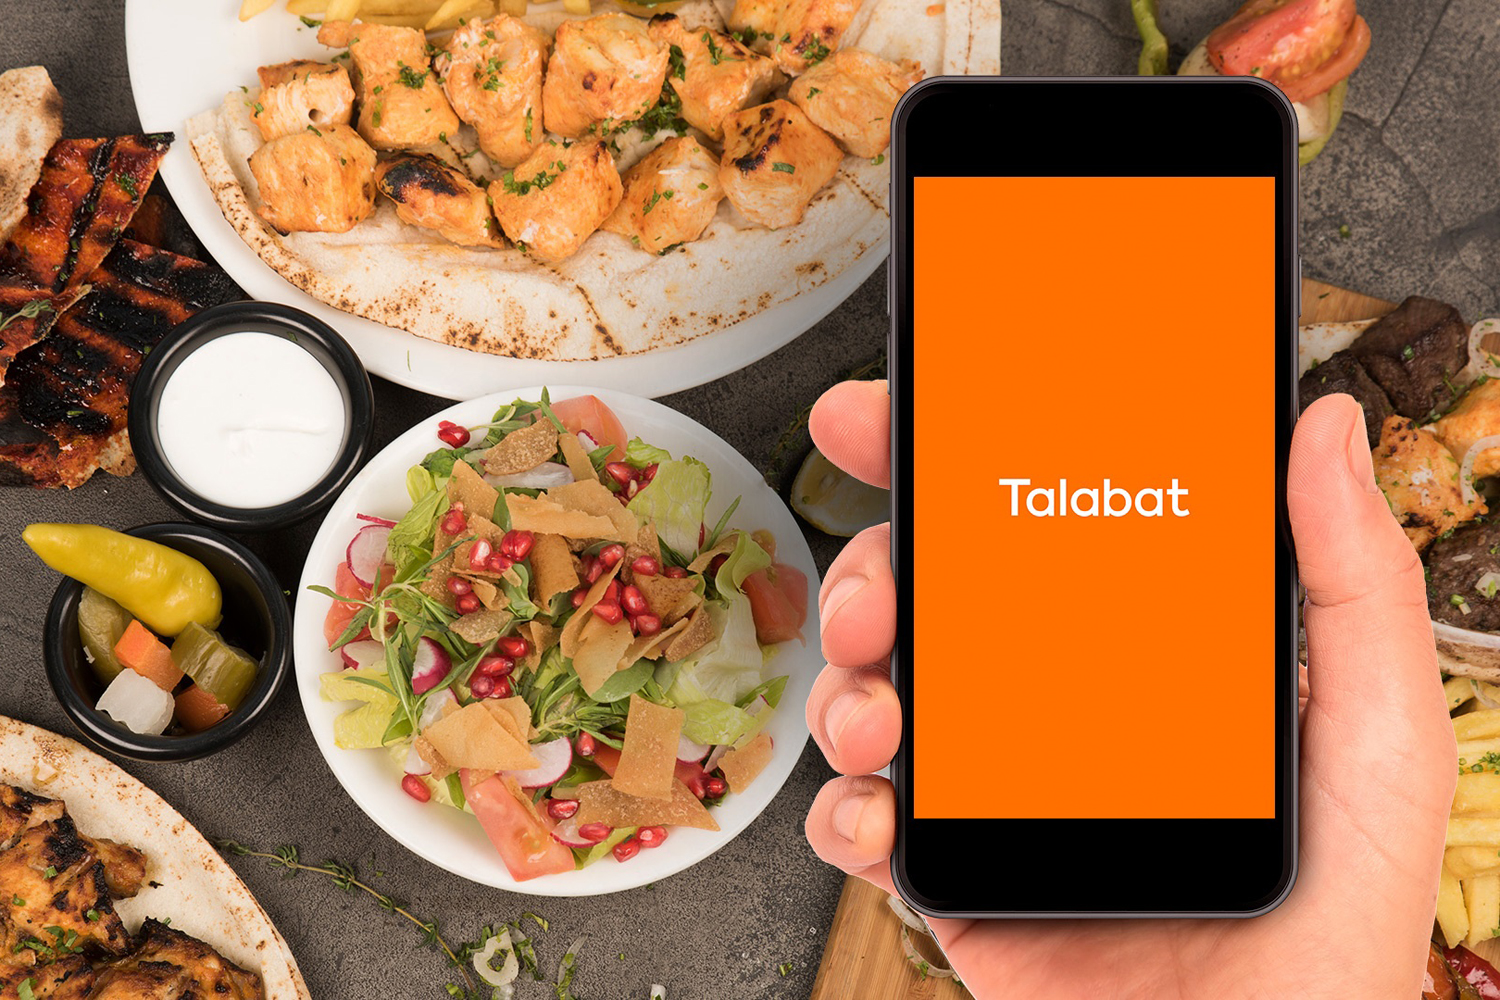 2. Talabat First Time Order Discount: Save 20% on Your First Order - wide 10